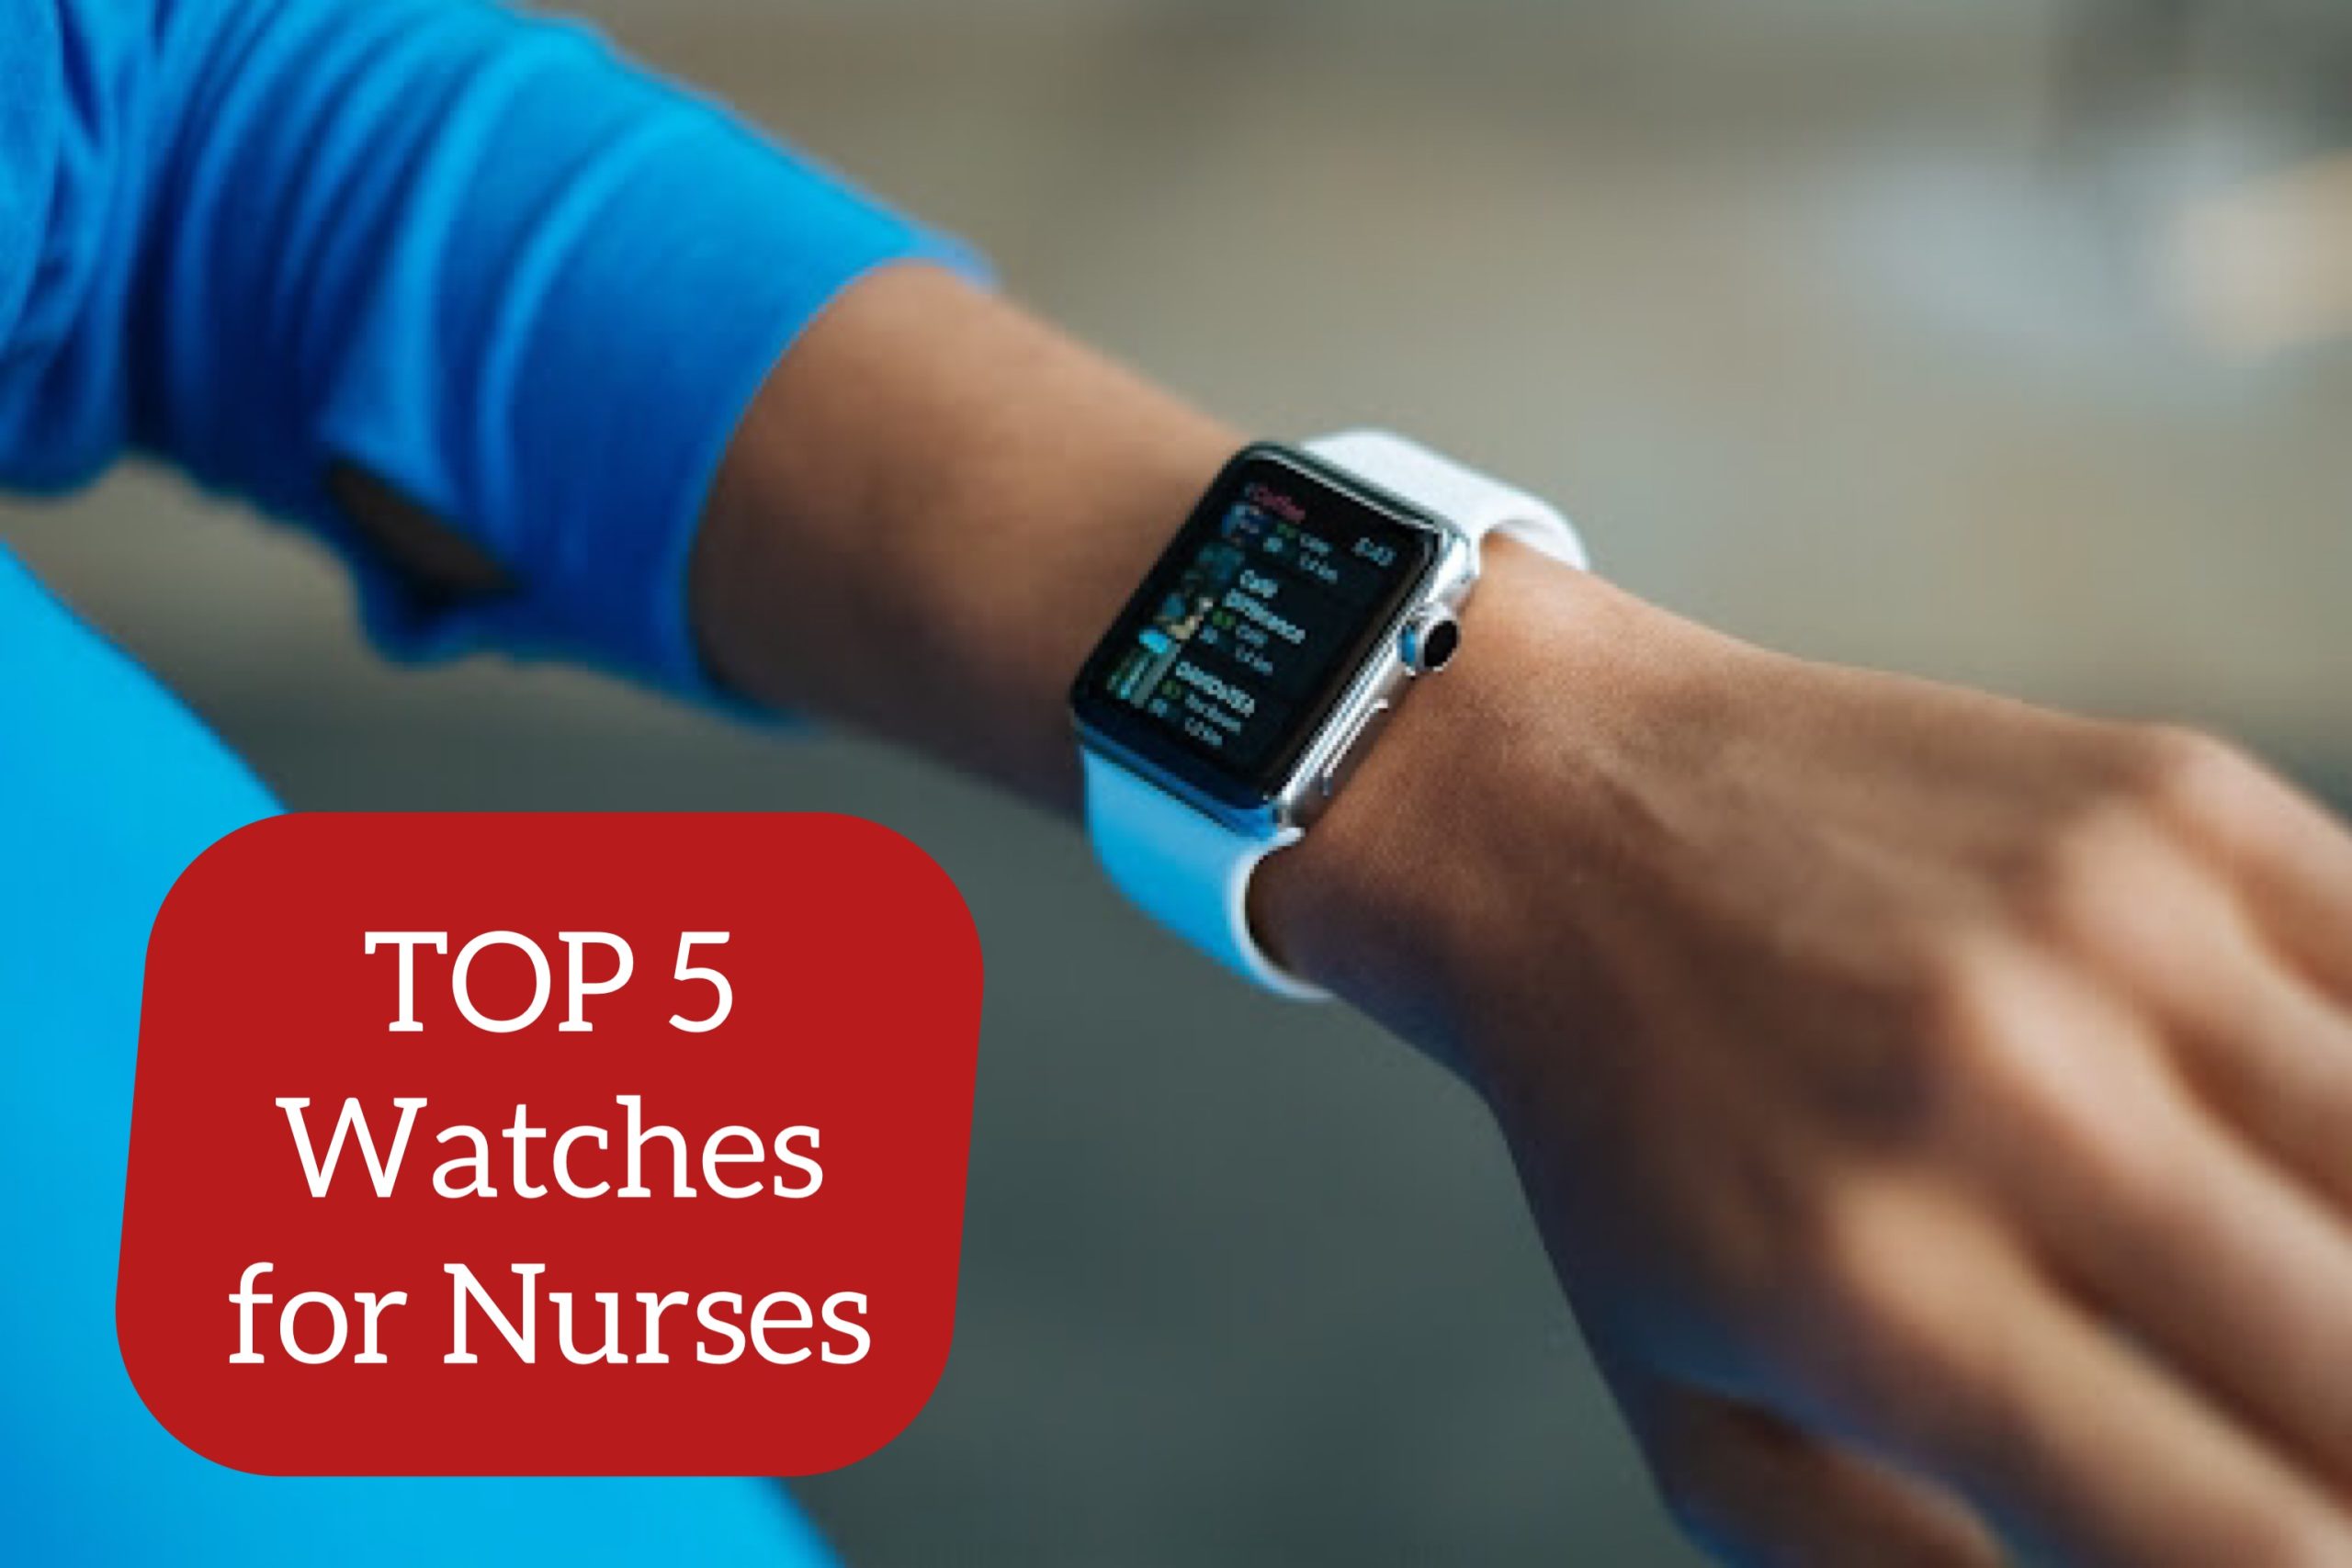 Top 5 Watches for nurses